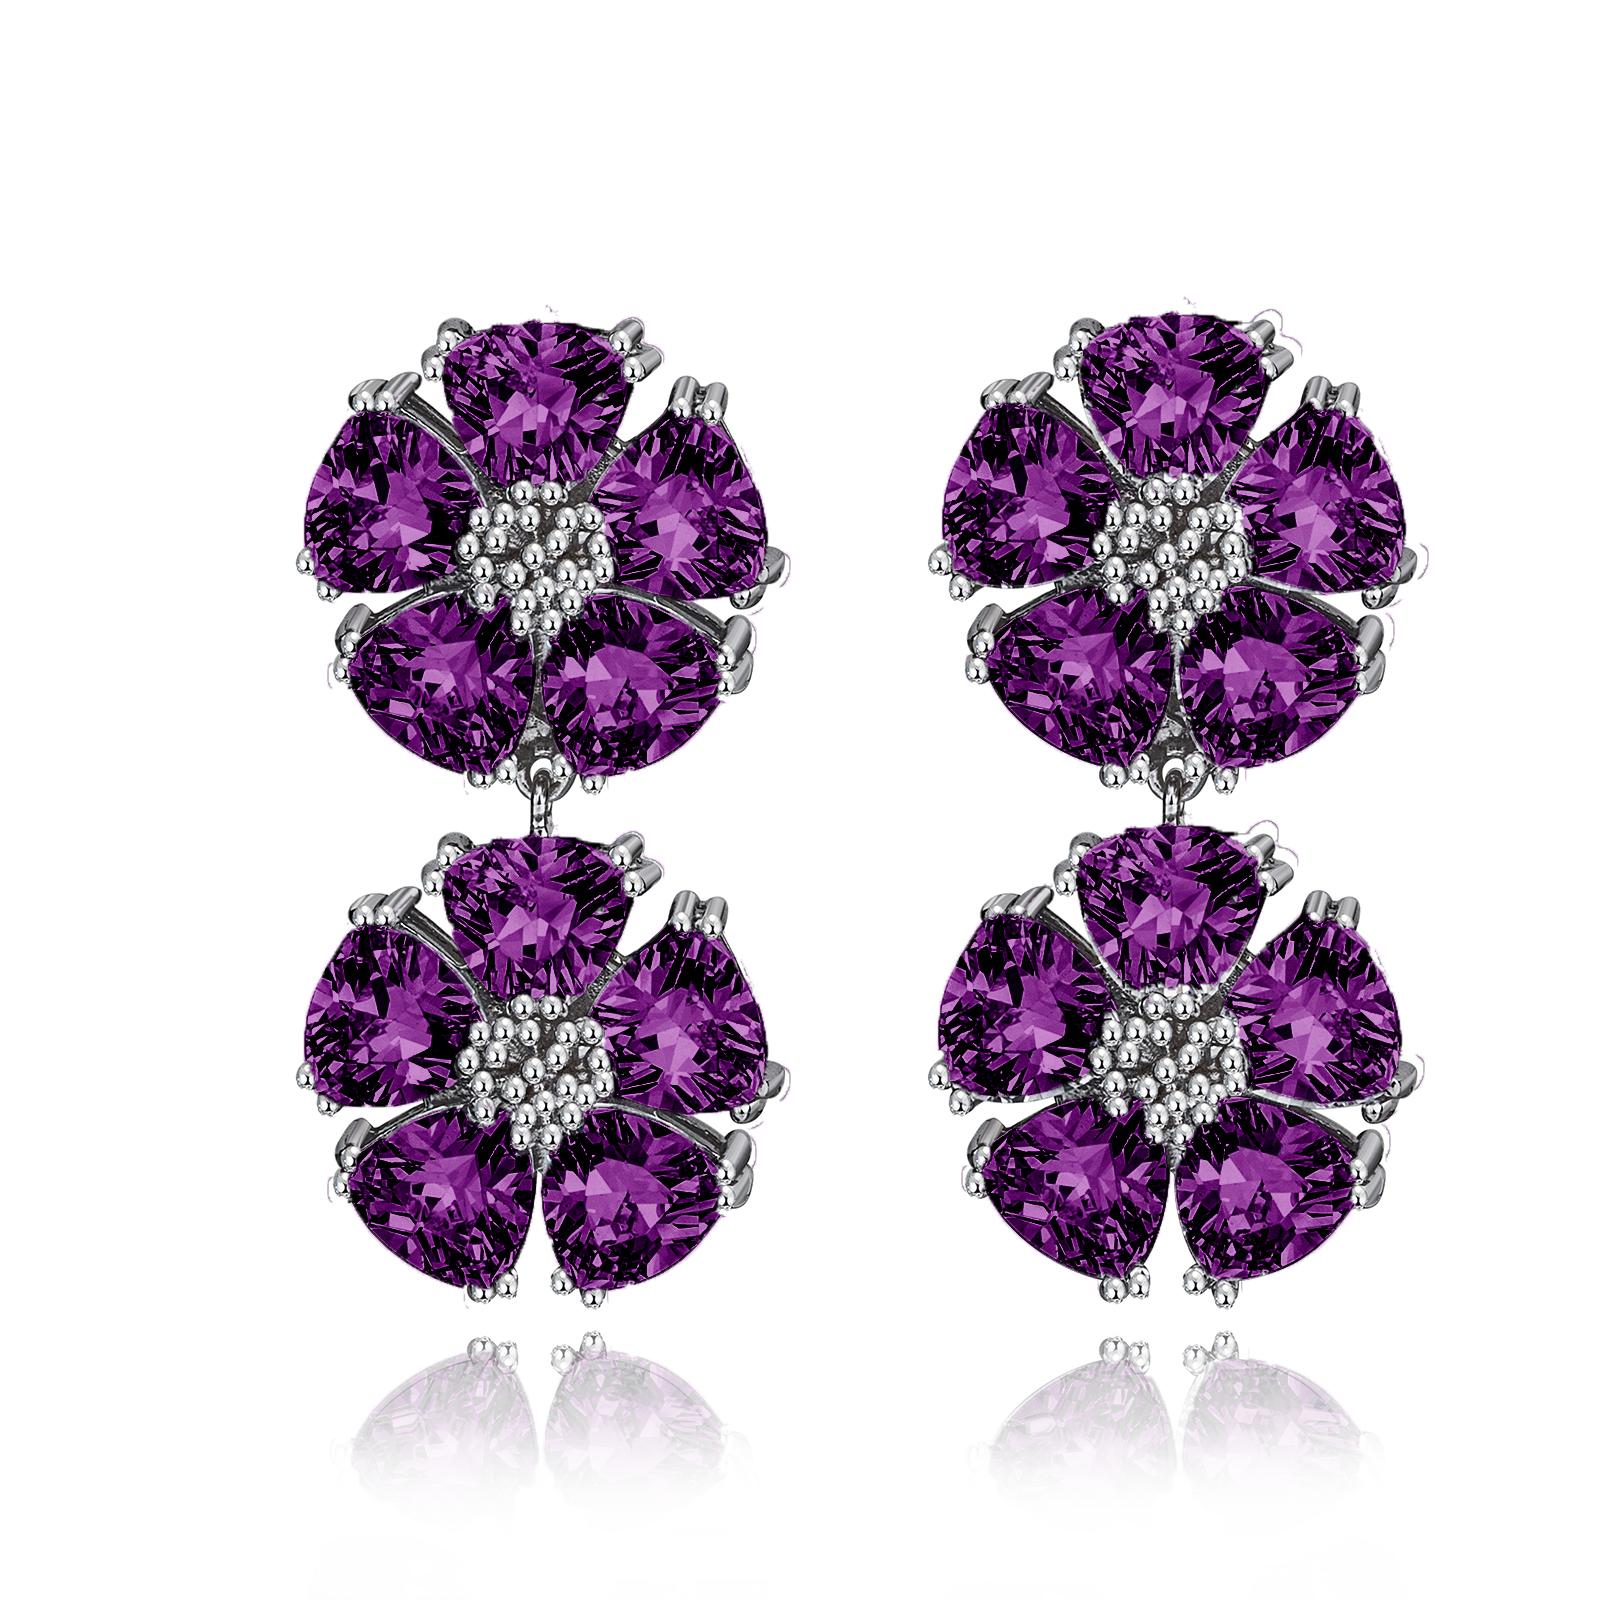 Designed in NYC

.925 Sterling Silver 2 x 20 mm Lavender Amethyst Double Blossom Stone Earrings. No matter the season, allow natural beauty to surround you wherever you go. Double blossom stone earrings: 

Sterling silver 
High-polish finish